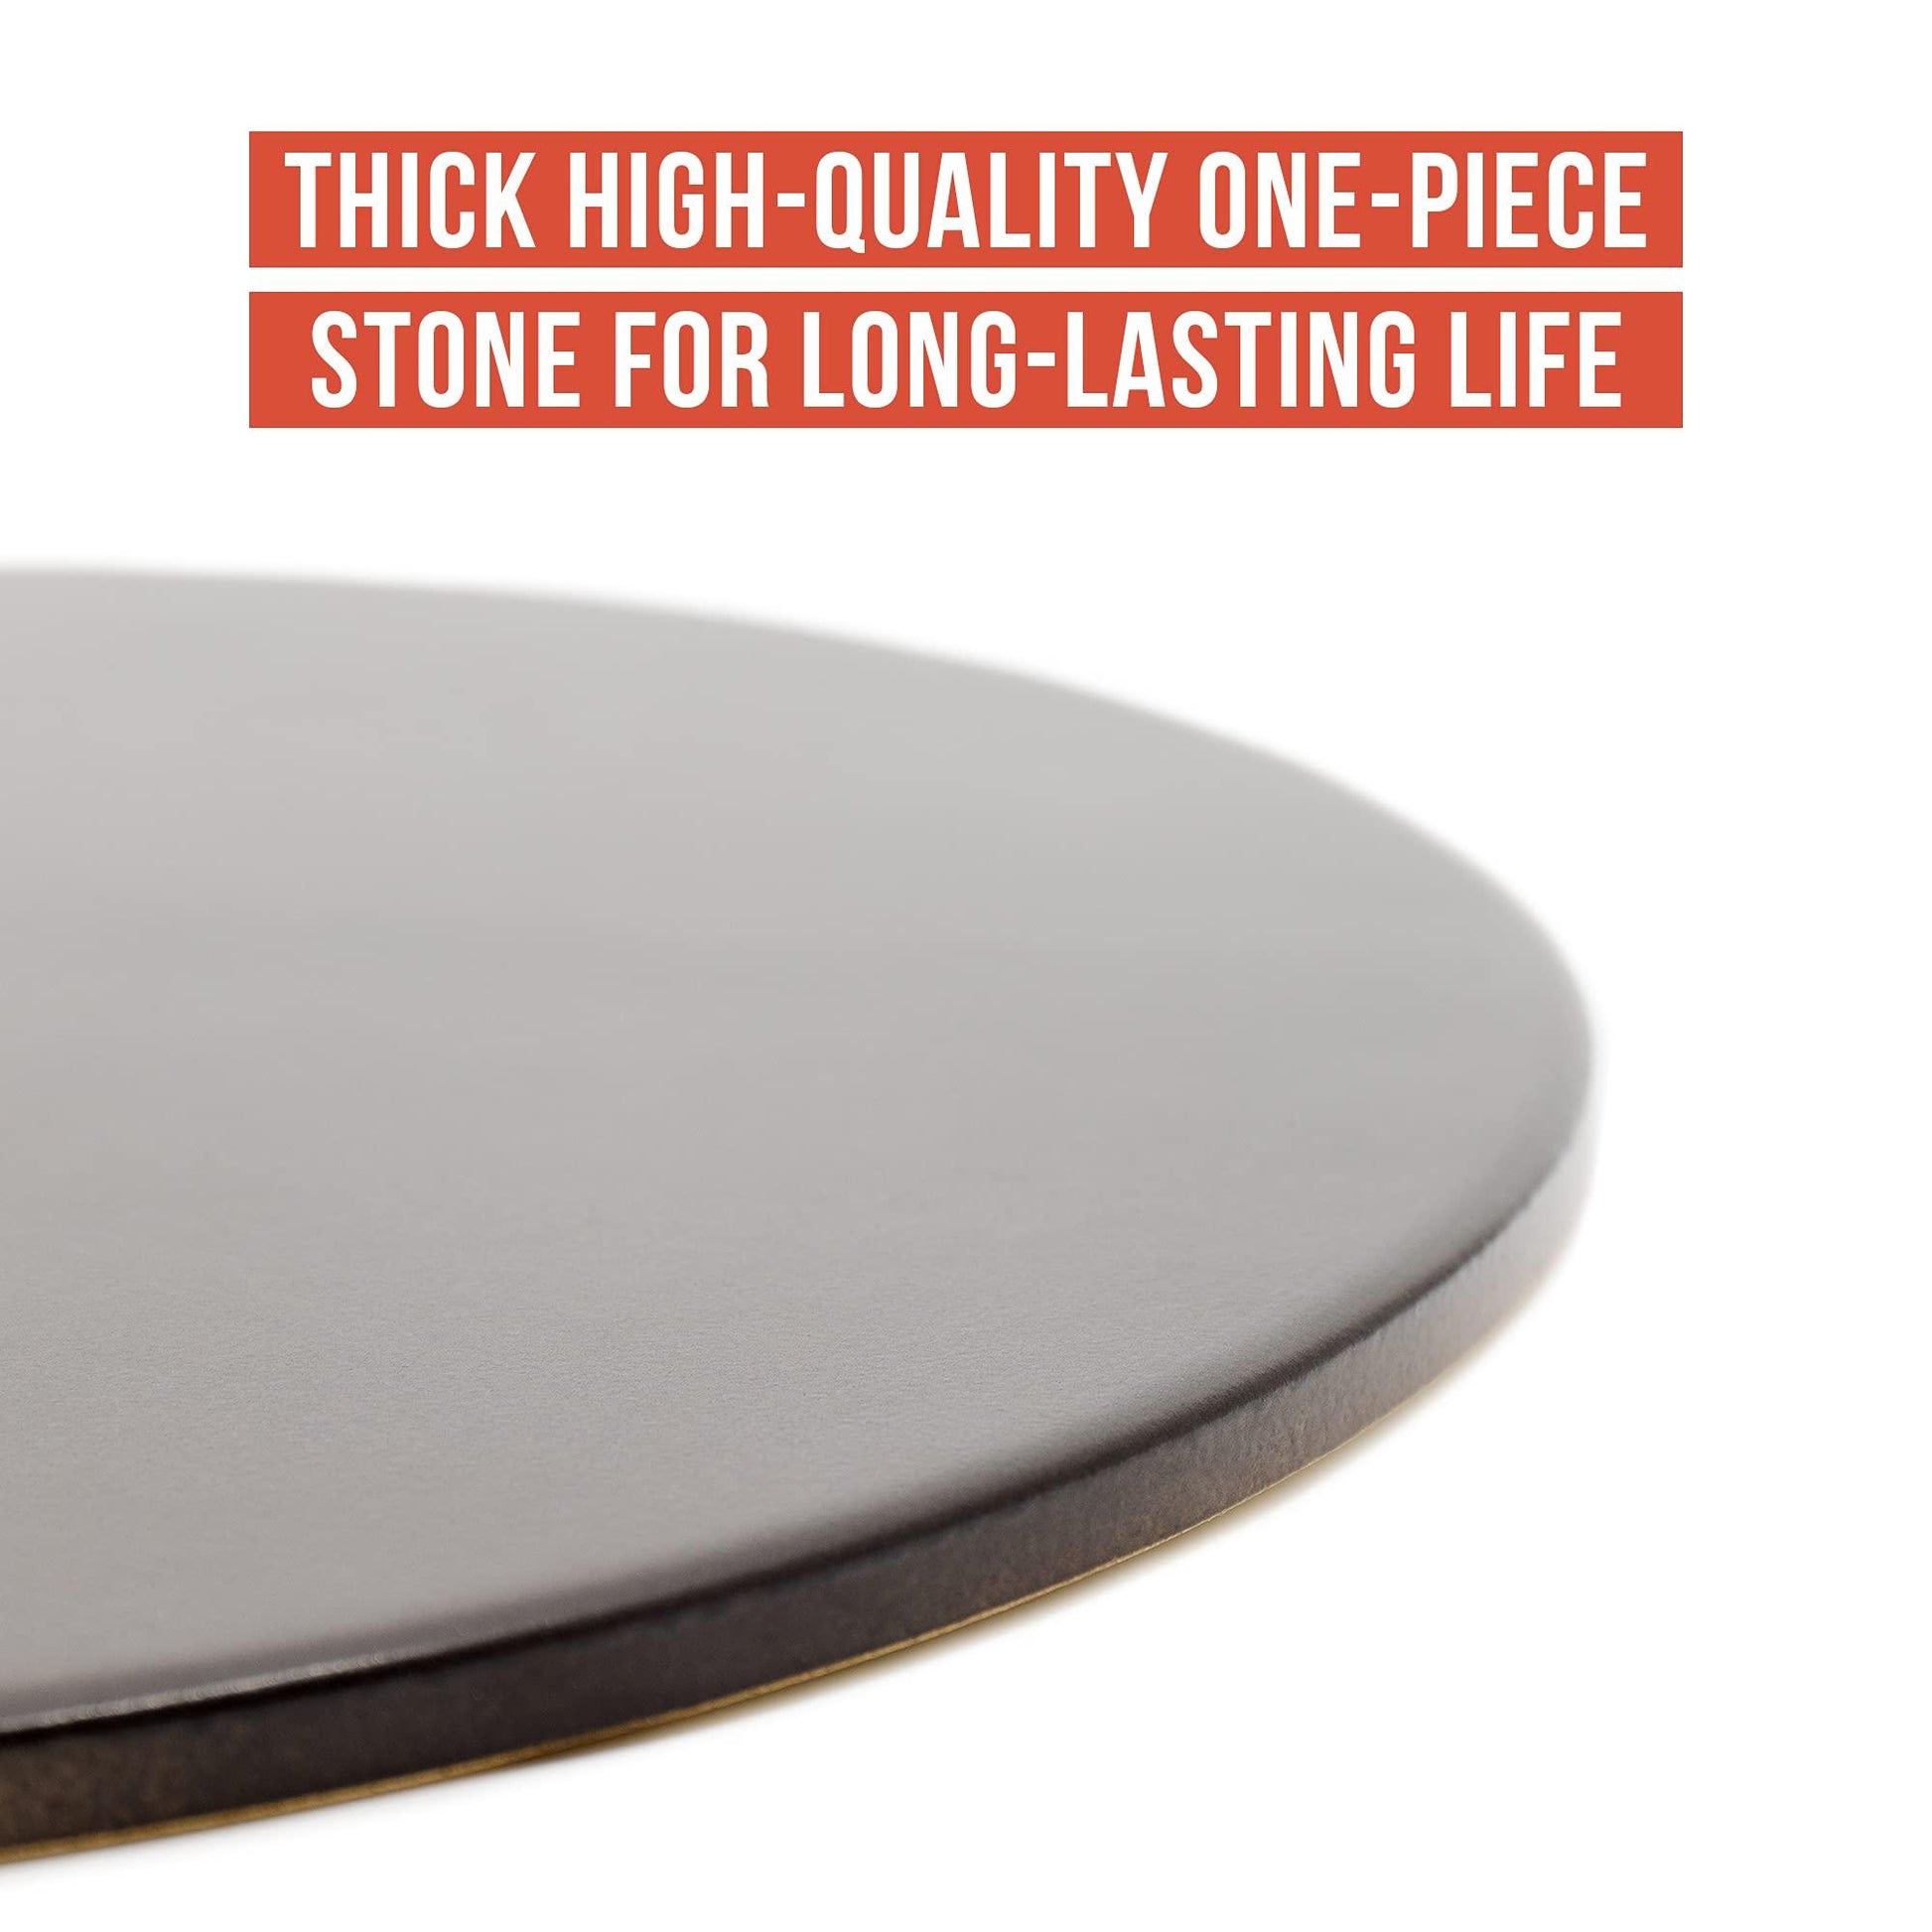 Chef Pomodoro Round Pizza Stone for Oven and Grill, Best Baking Stone for Ovens and Grills, Pizza Baking Stone for Pizza and Bread Baking, Durable (15 inch) - CookCave